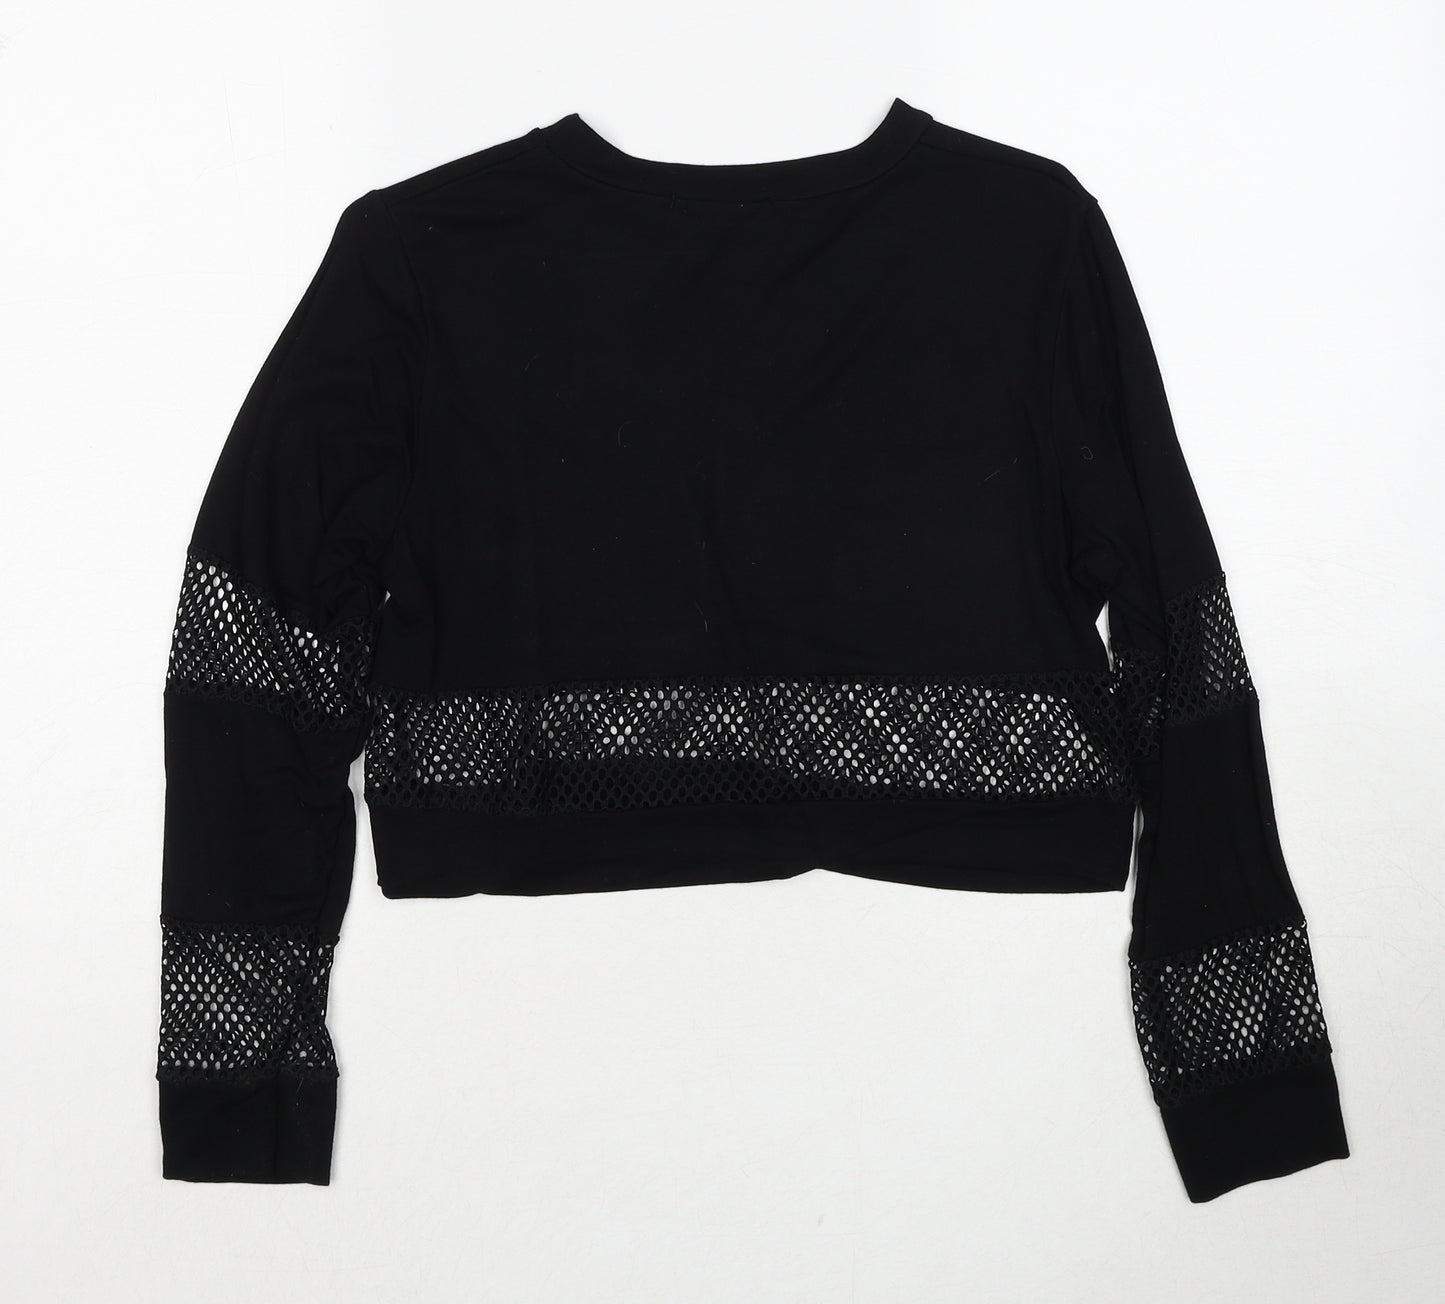 Stylewise Womens Black Viscose Pullover Sweatshirt Size S Pullover - Troublesome Size S-M